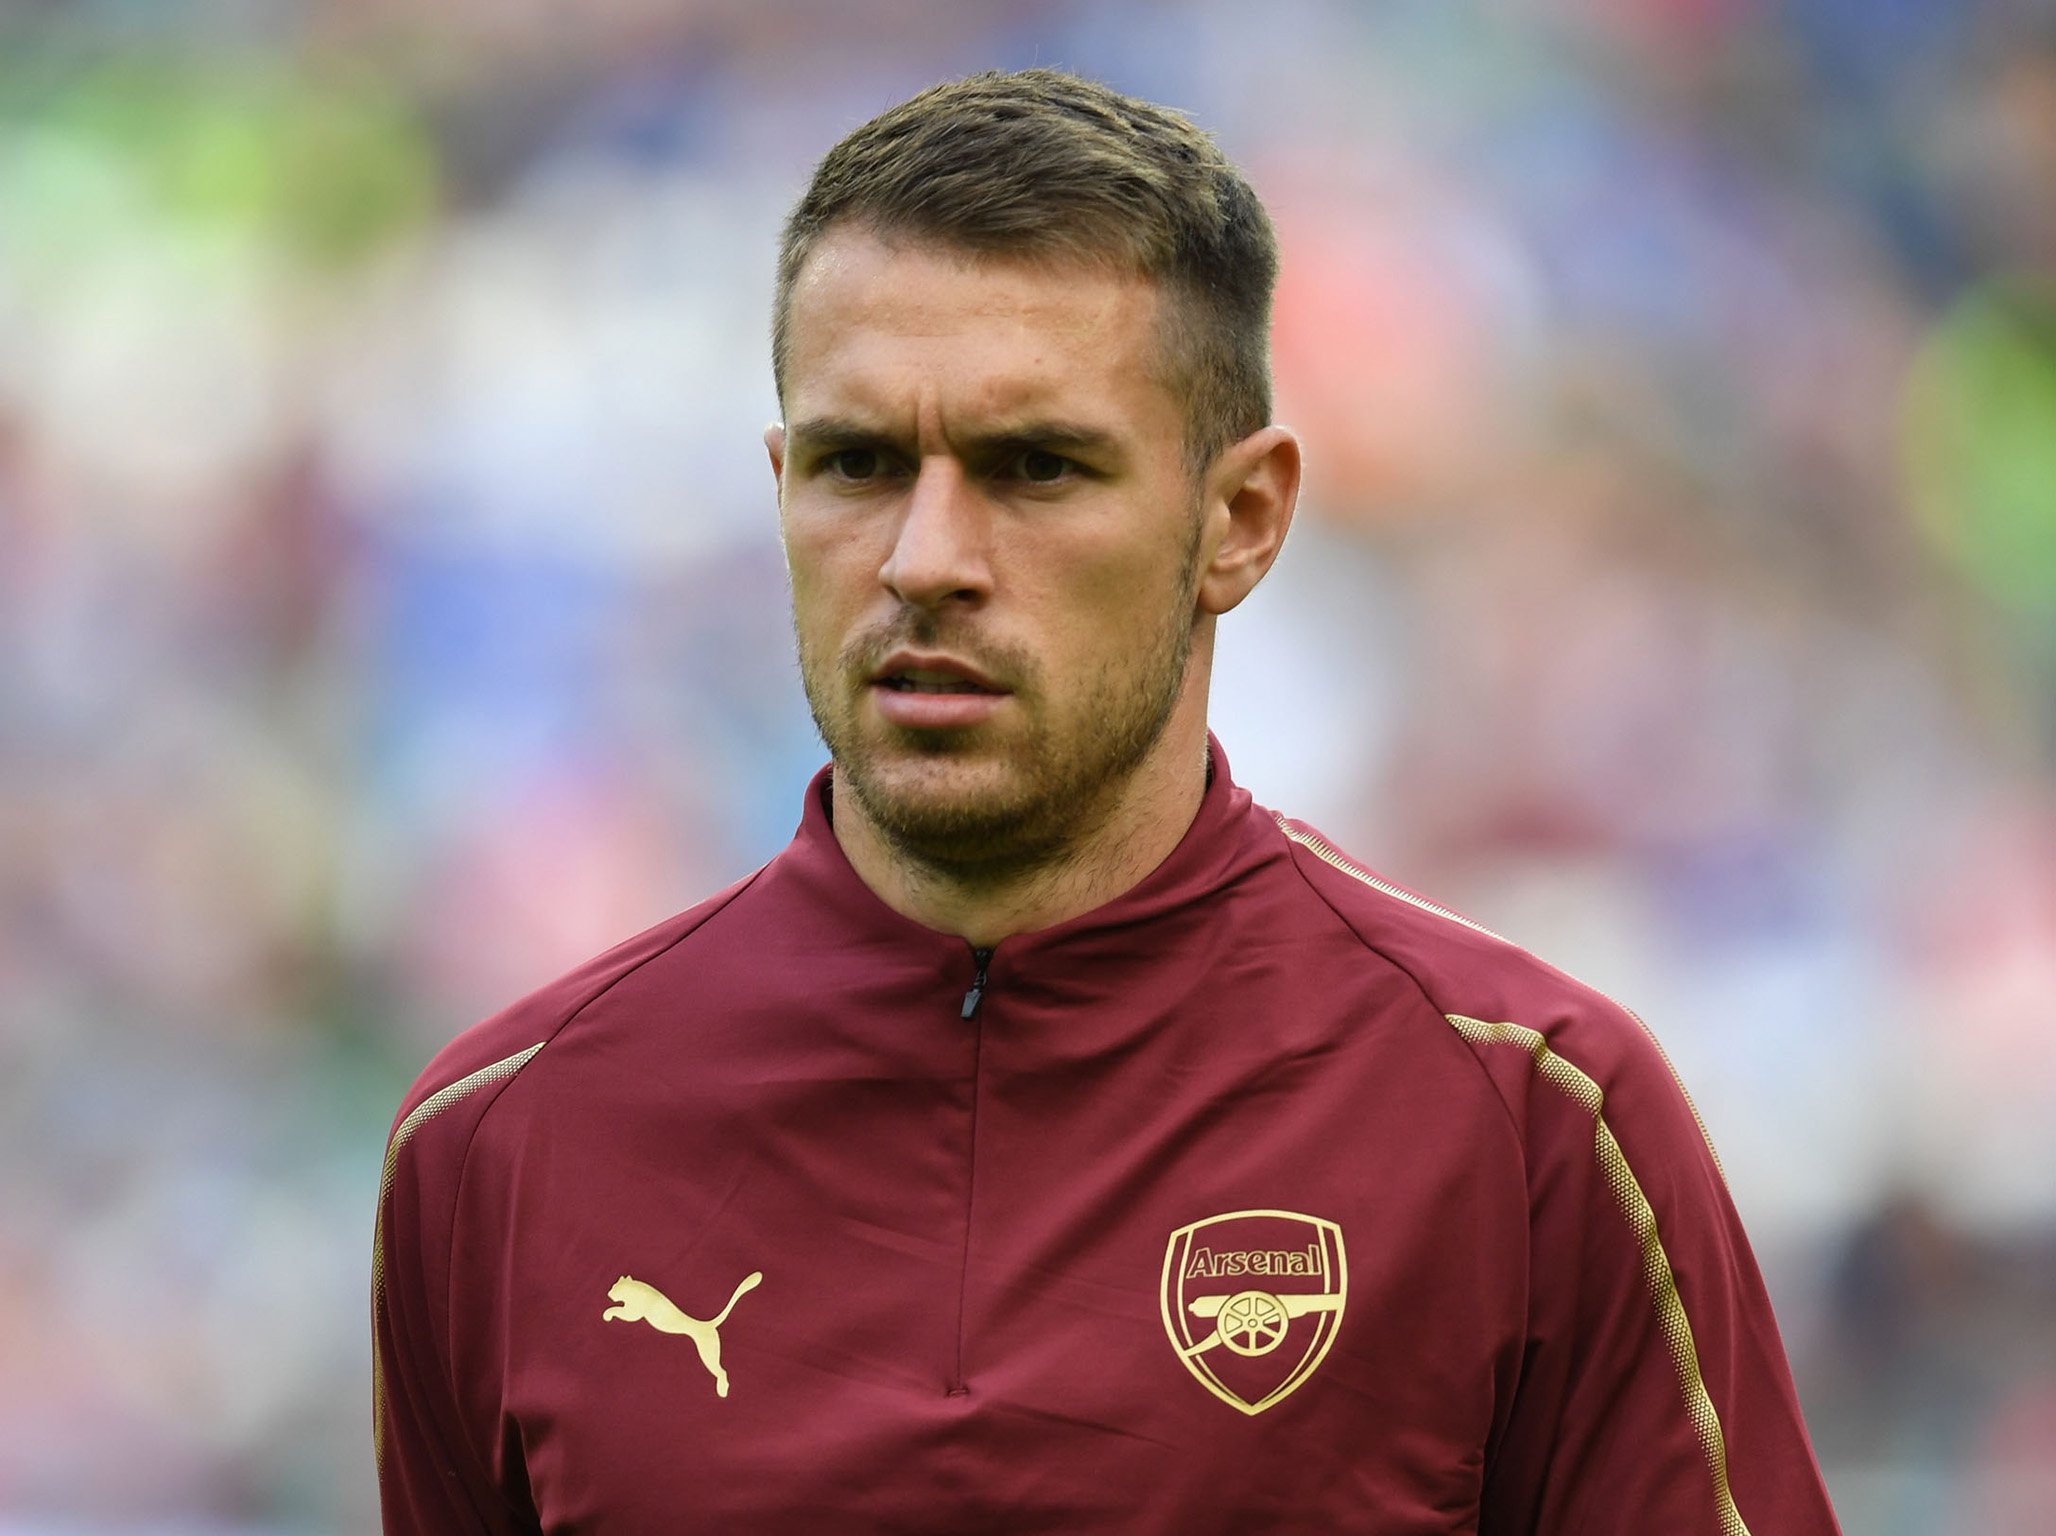 Ramsey emotional farewell to Arsenal as he awaits his career in Juventus | Transfer News